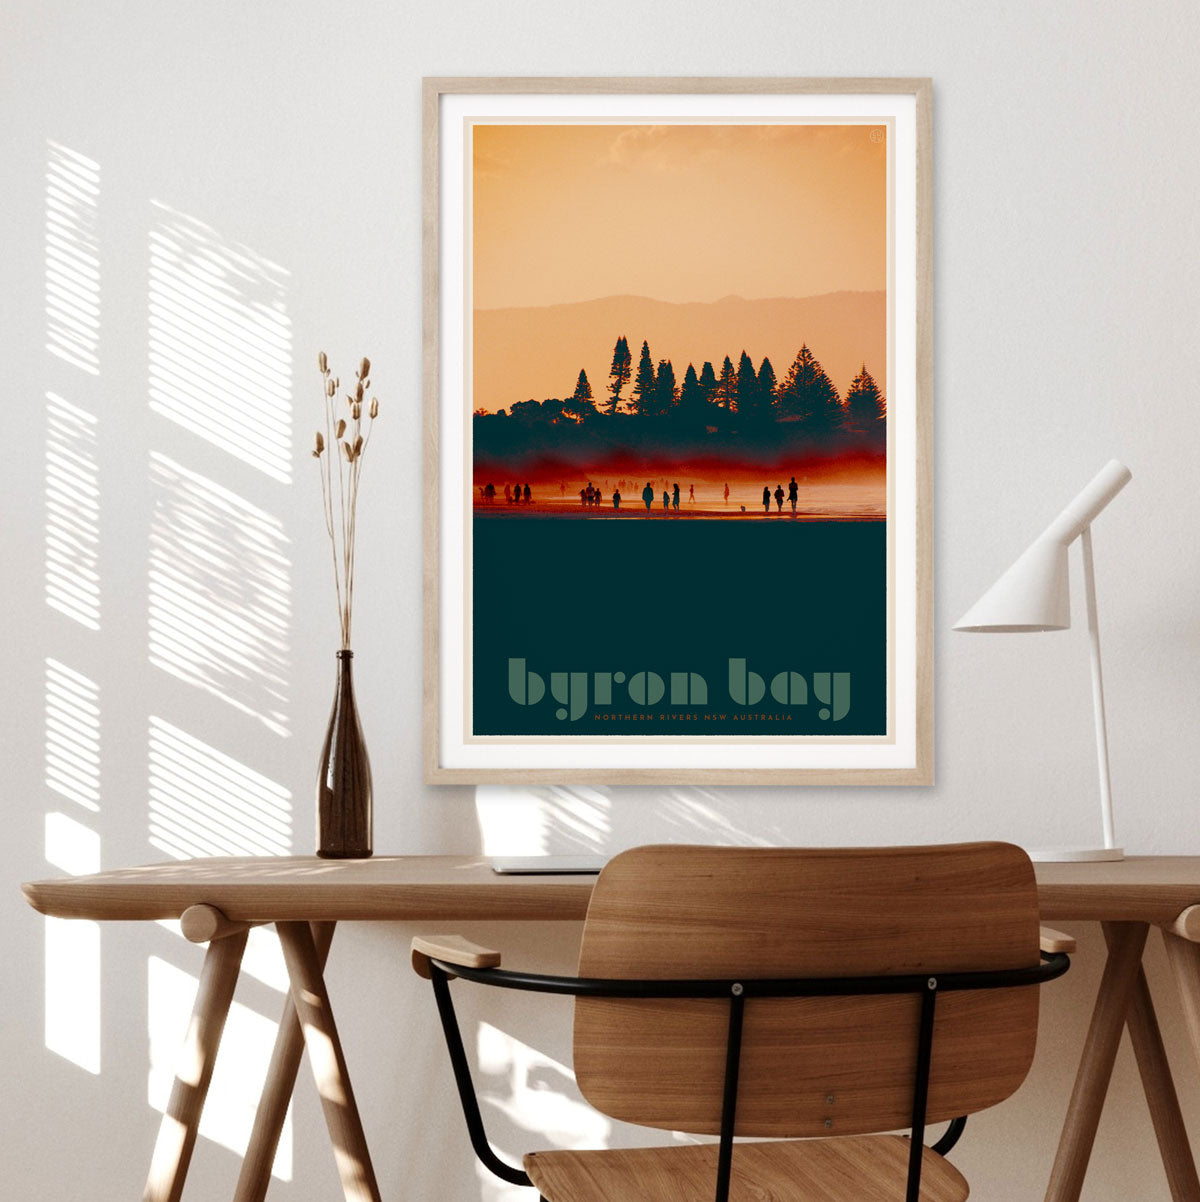 Byron Bay Beach retro vintage poster by Places We Luv